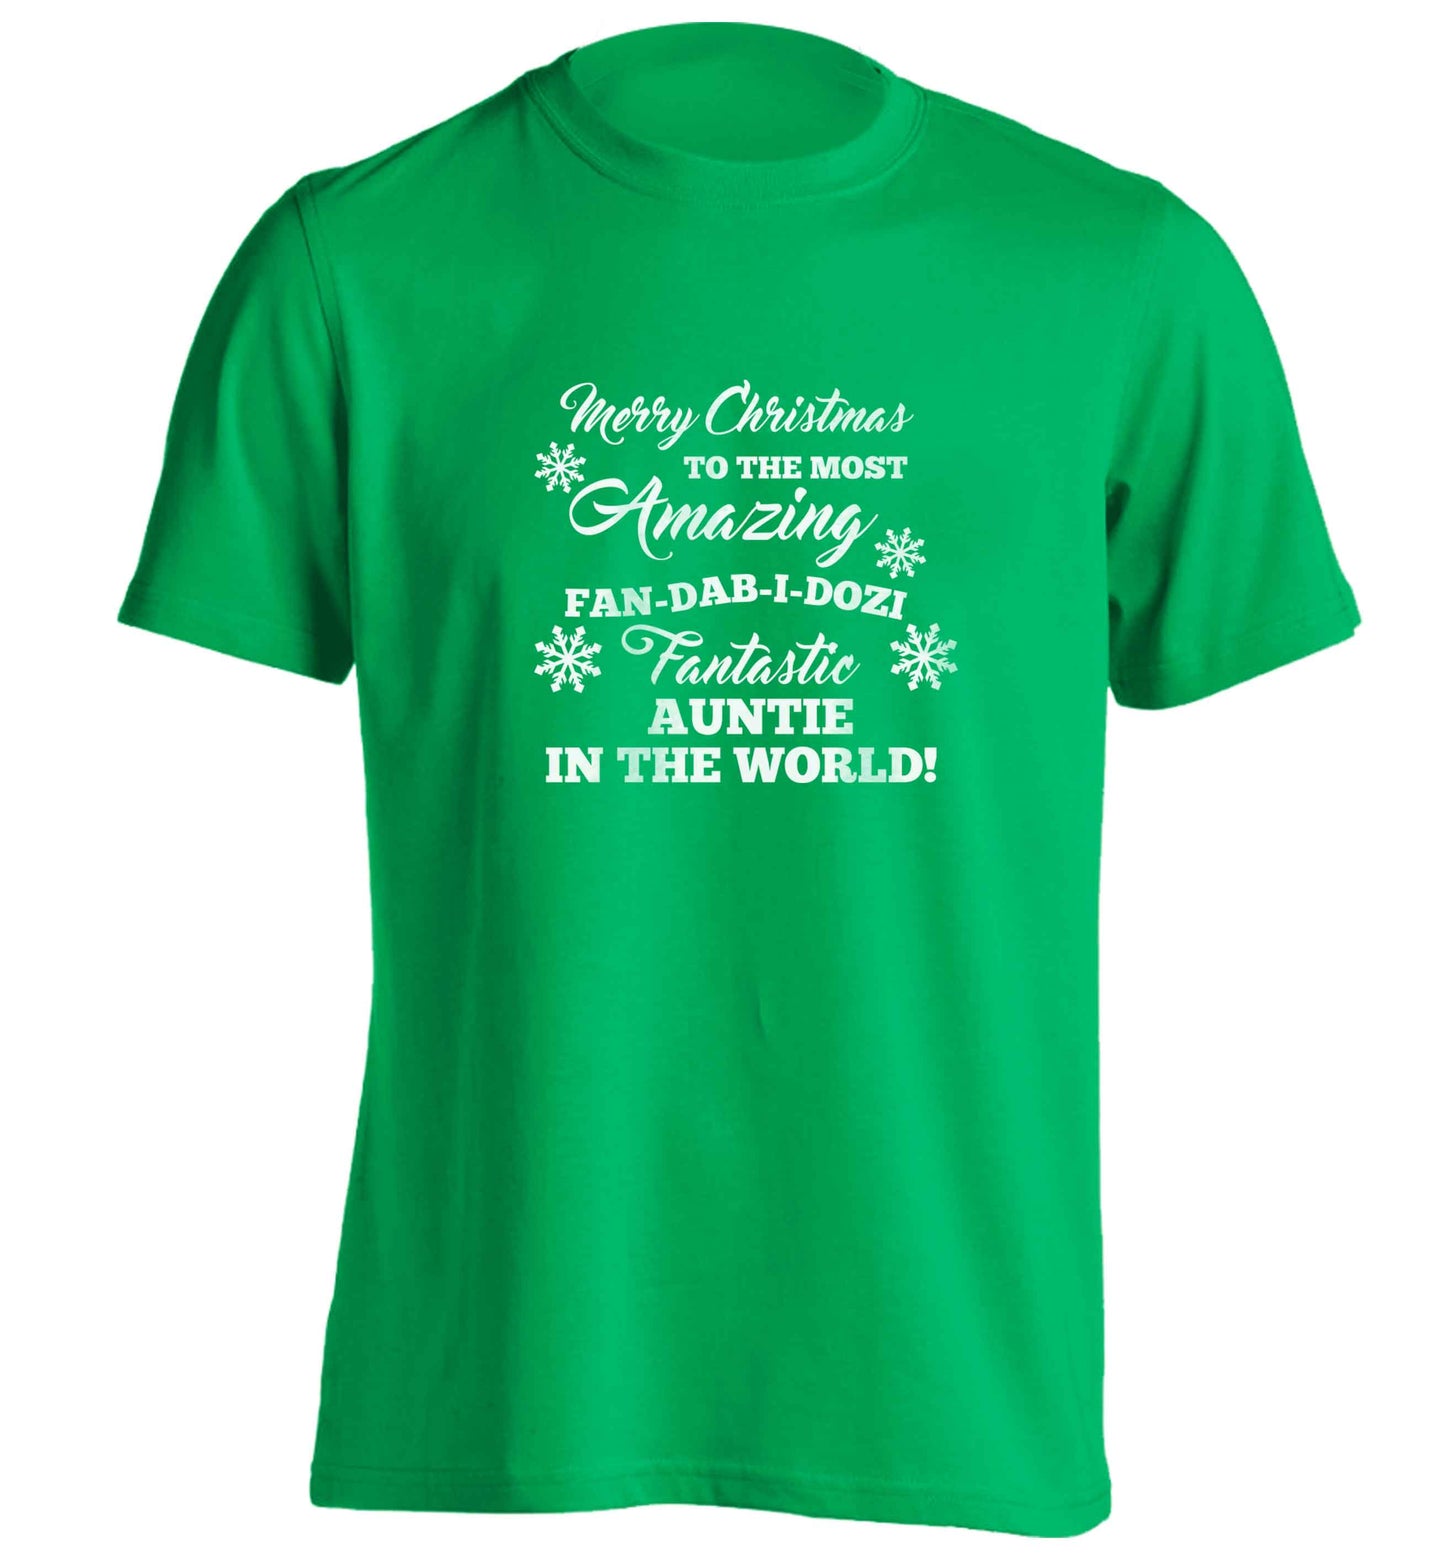 Merry Christmas to the most amazing fan-dab-i-dozi fantasic Auntie in the world adults unisex green Tshirt 2XL